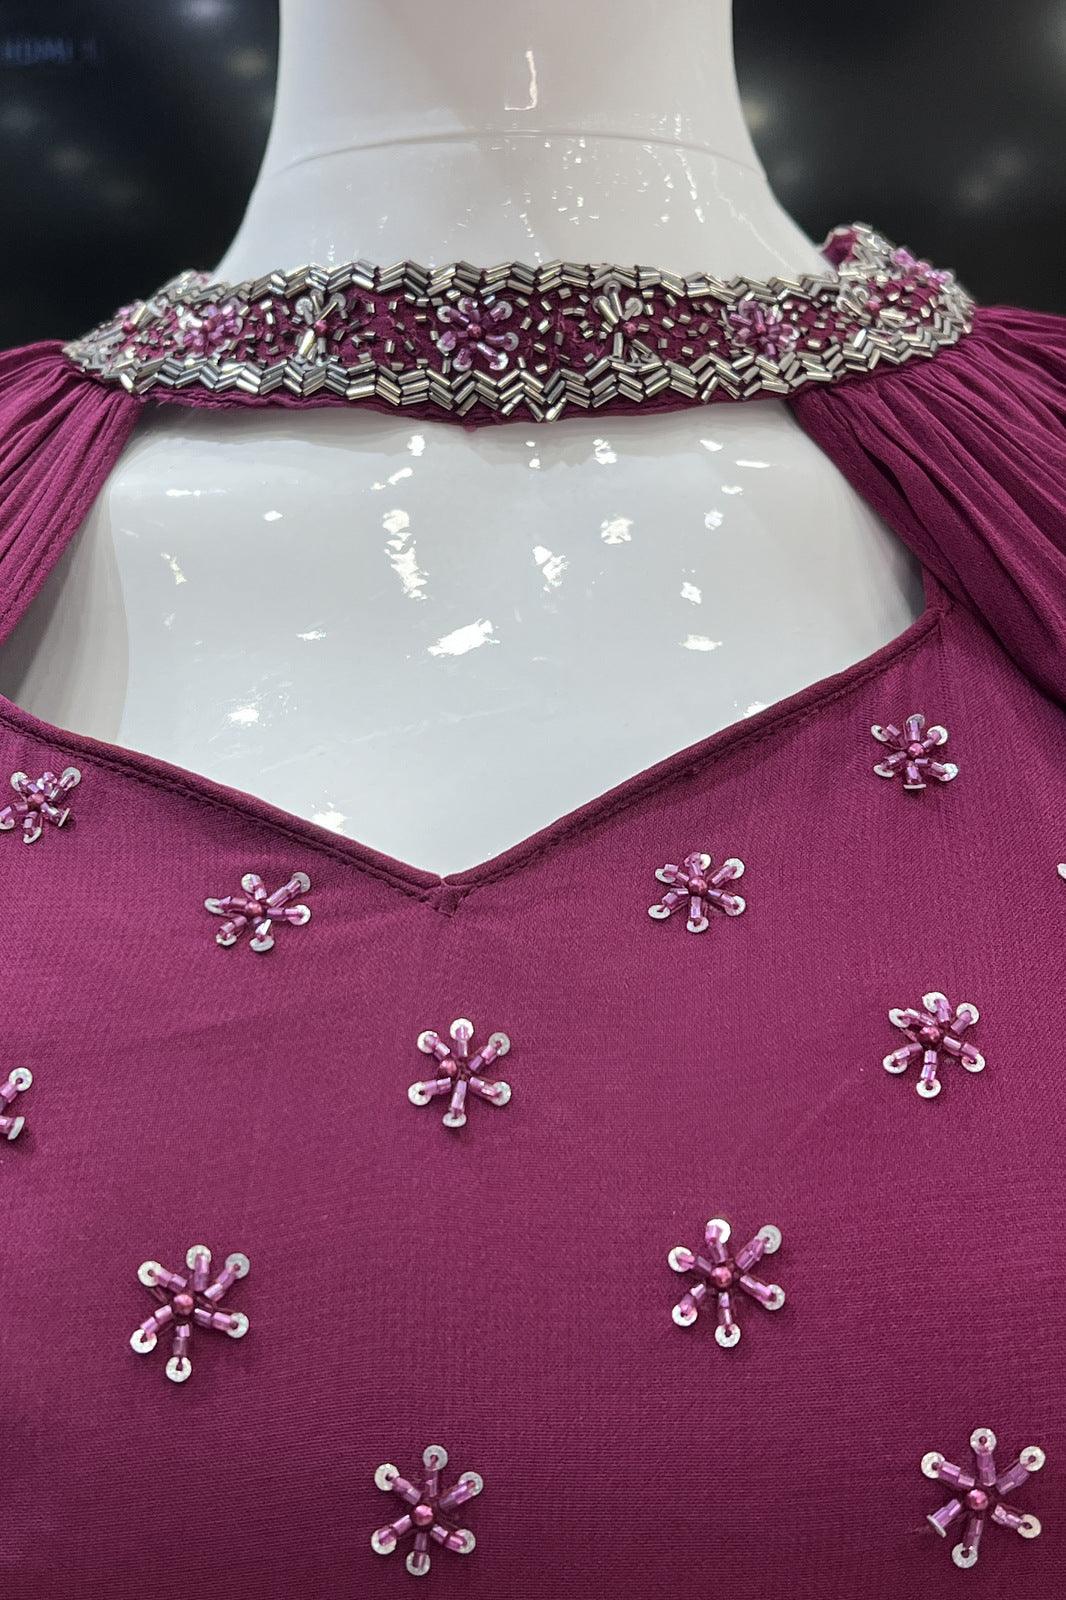 Wine Beads and Sequins work Floor Length Anarkali Suit with Cape and Belt - Seasons Chennai